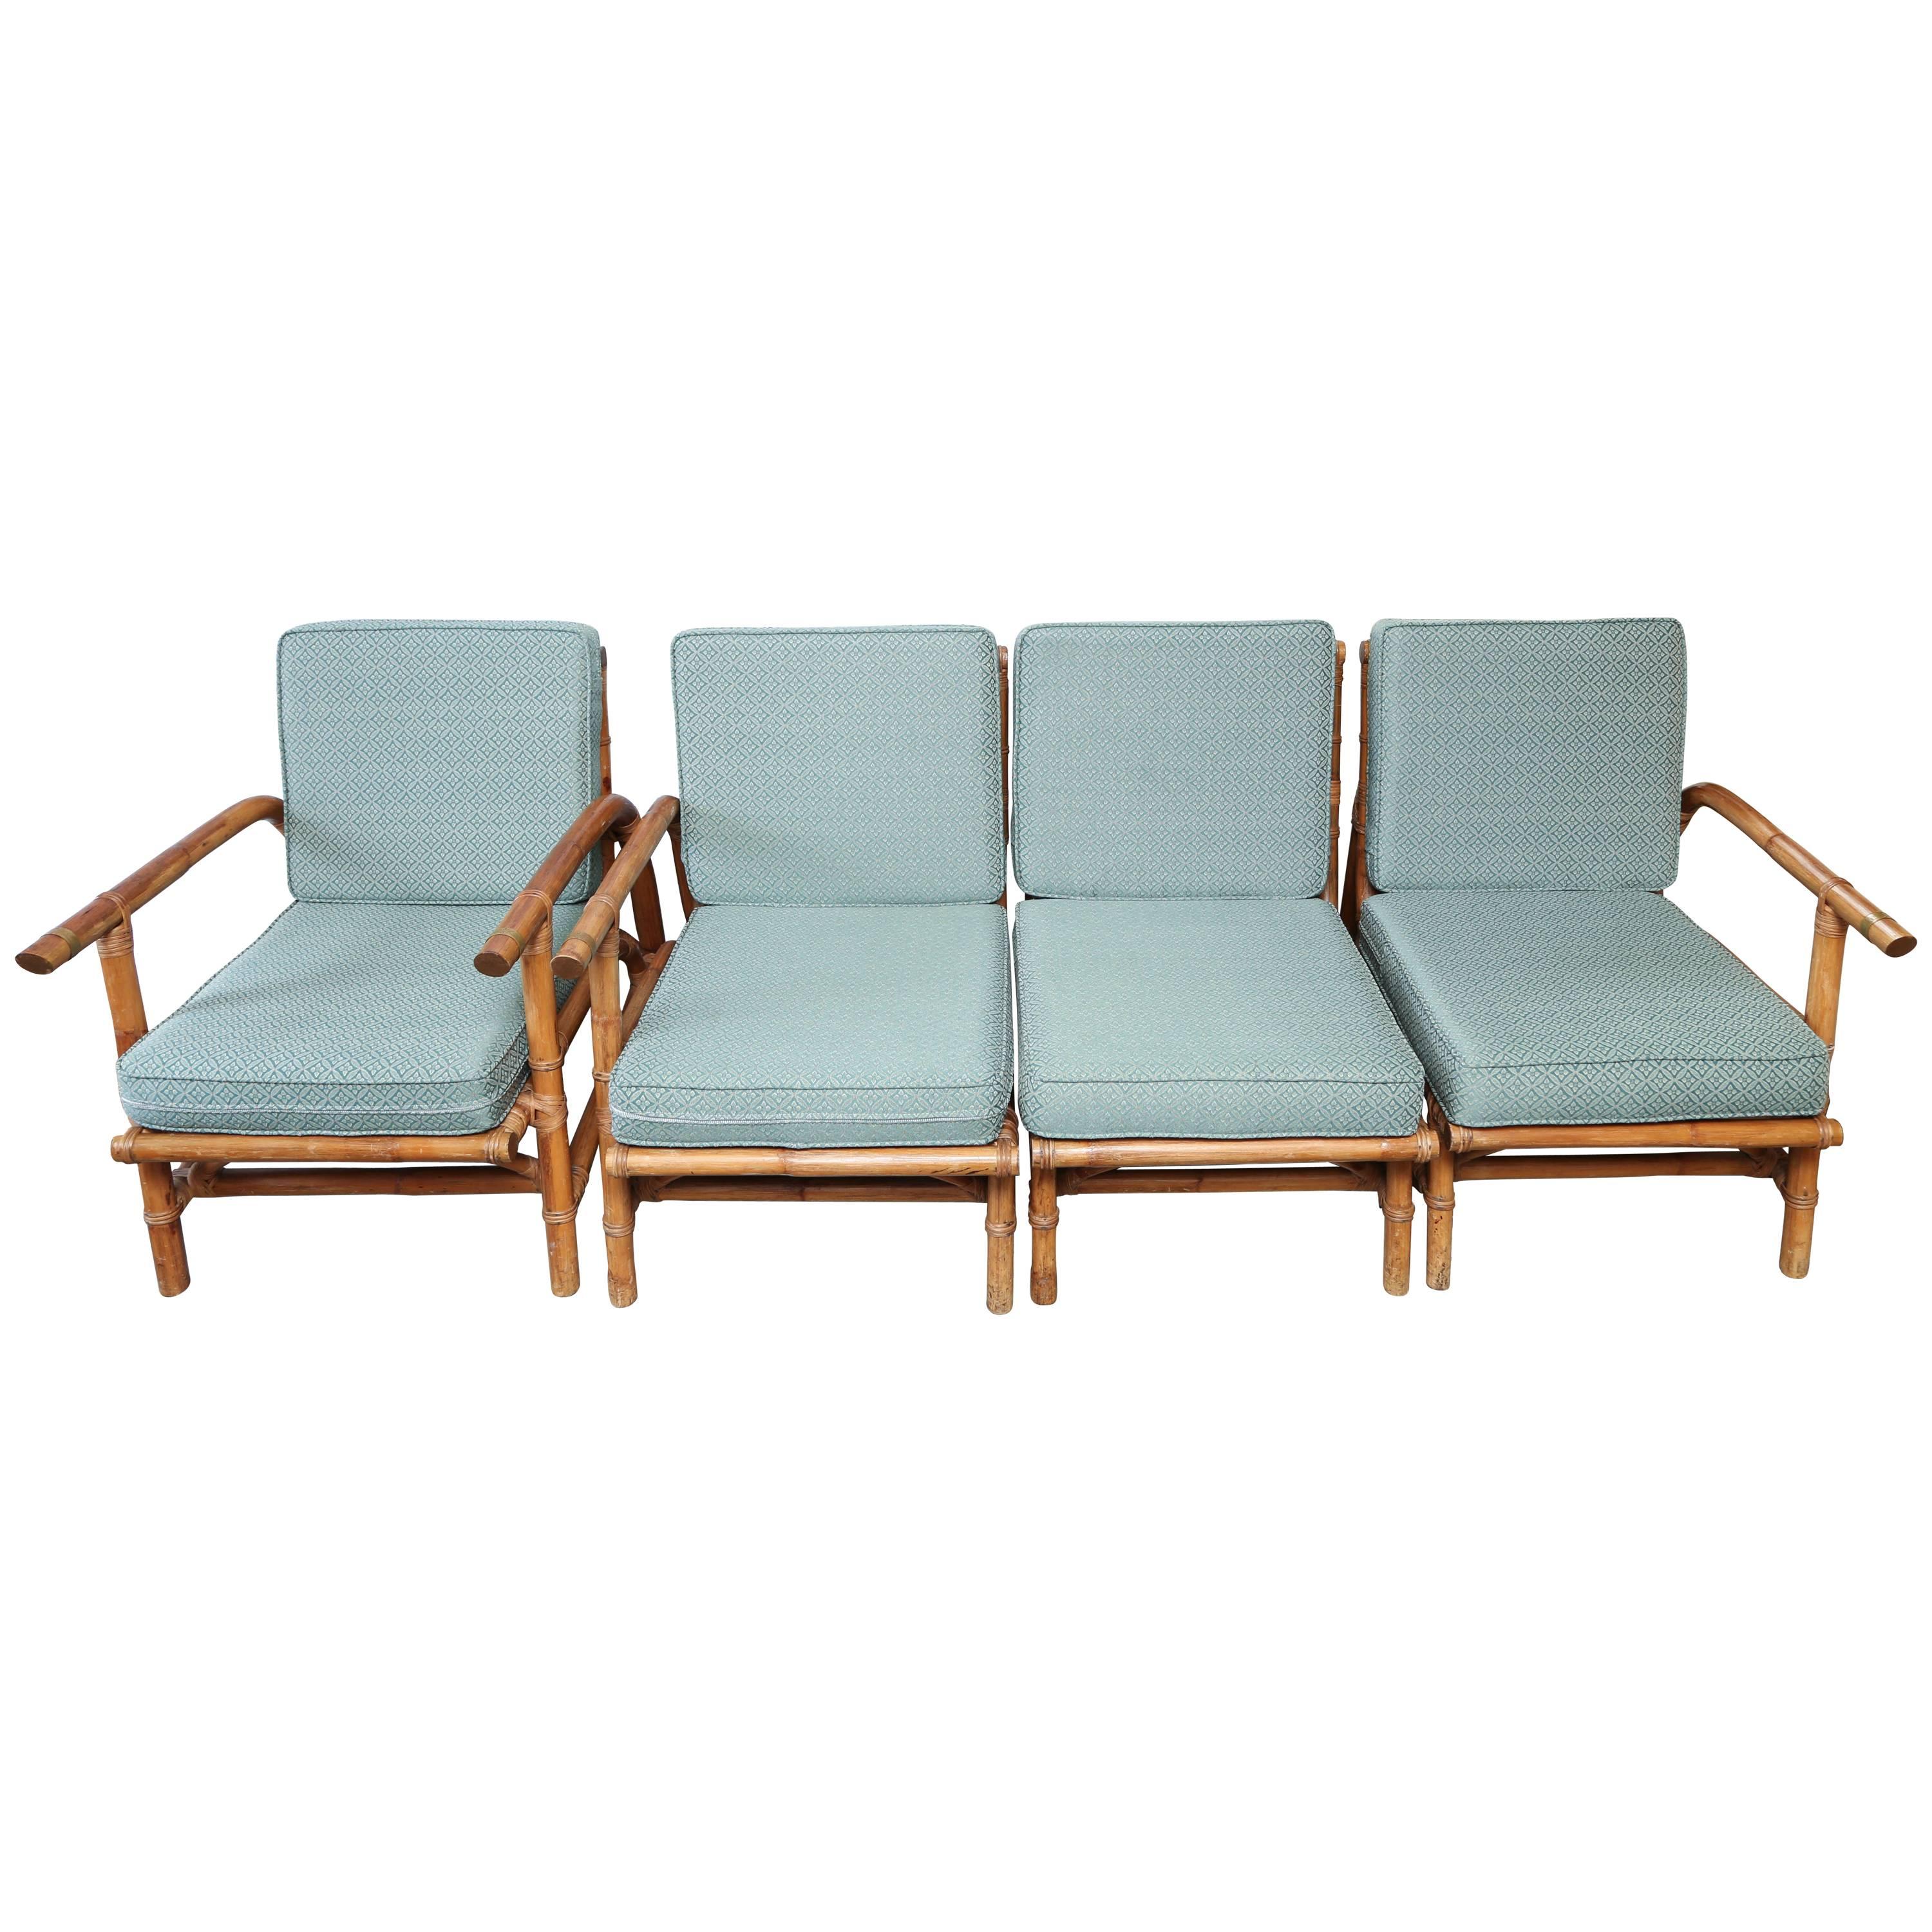 Superb Vintage Four-Piece Bamboo and Rattan Seating Arrangement